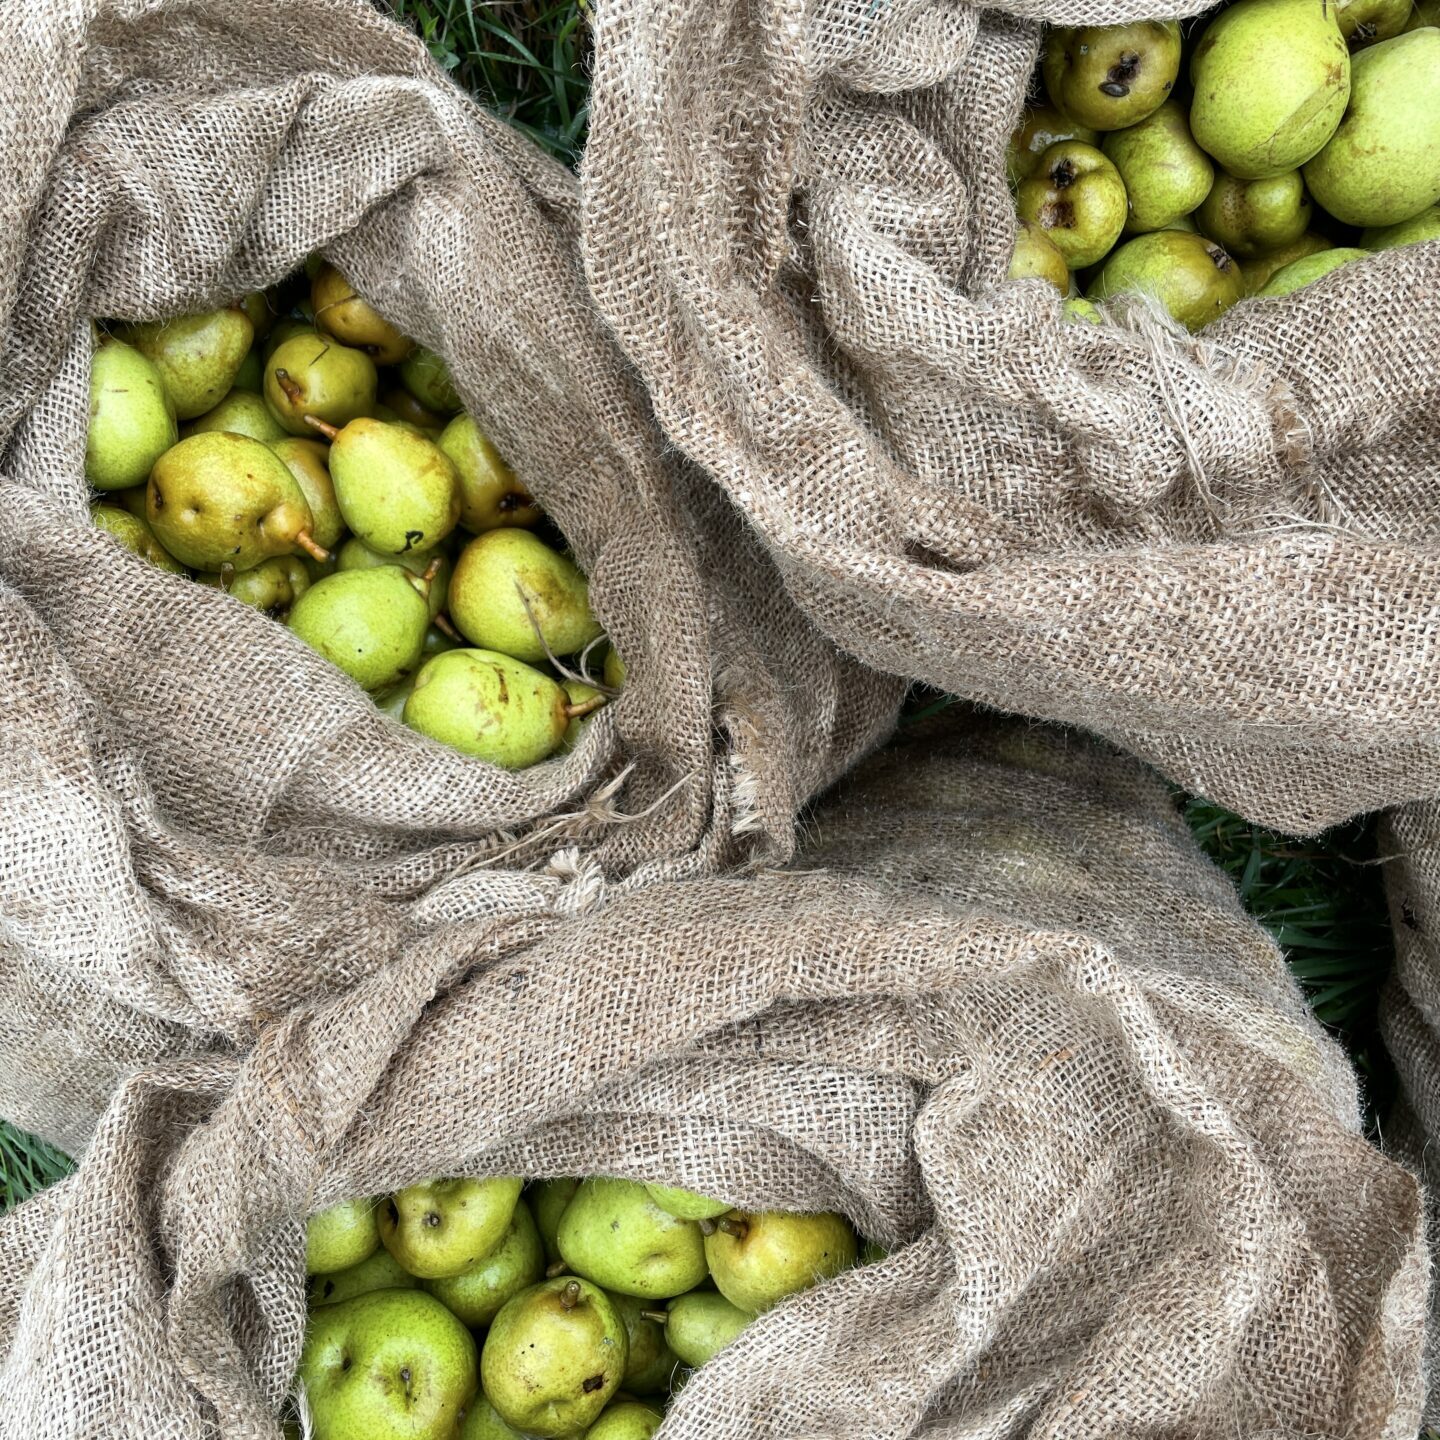 Pears harvested for perry at Sylvan Cider